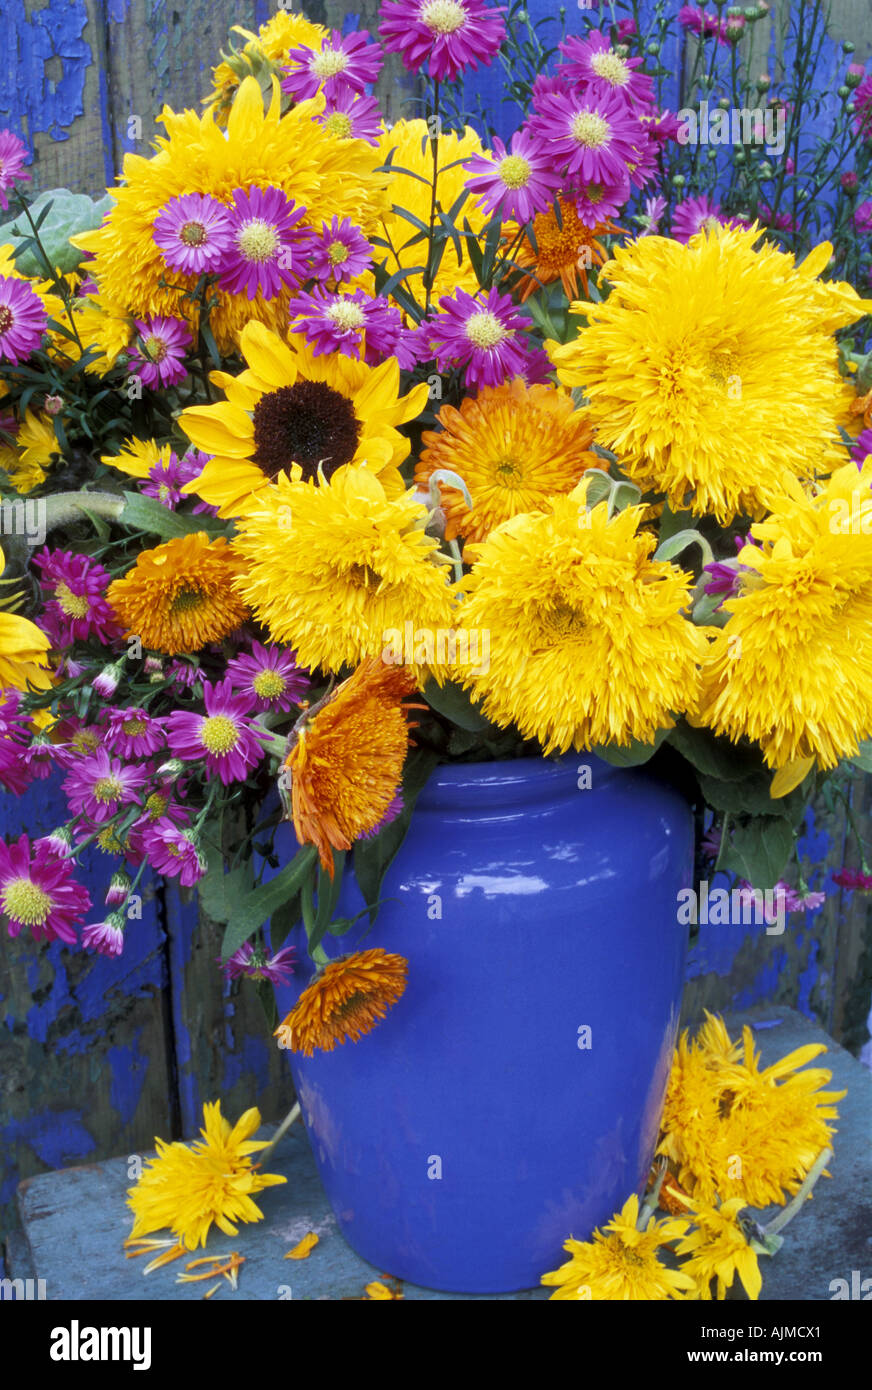 Vase of Single and Double Sunflowers, Marigolds and Asters. Stock Photo